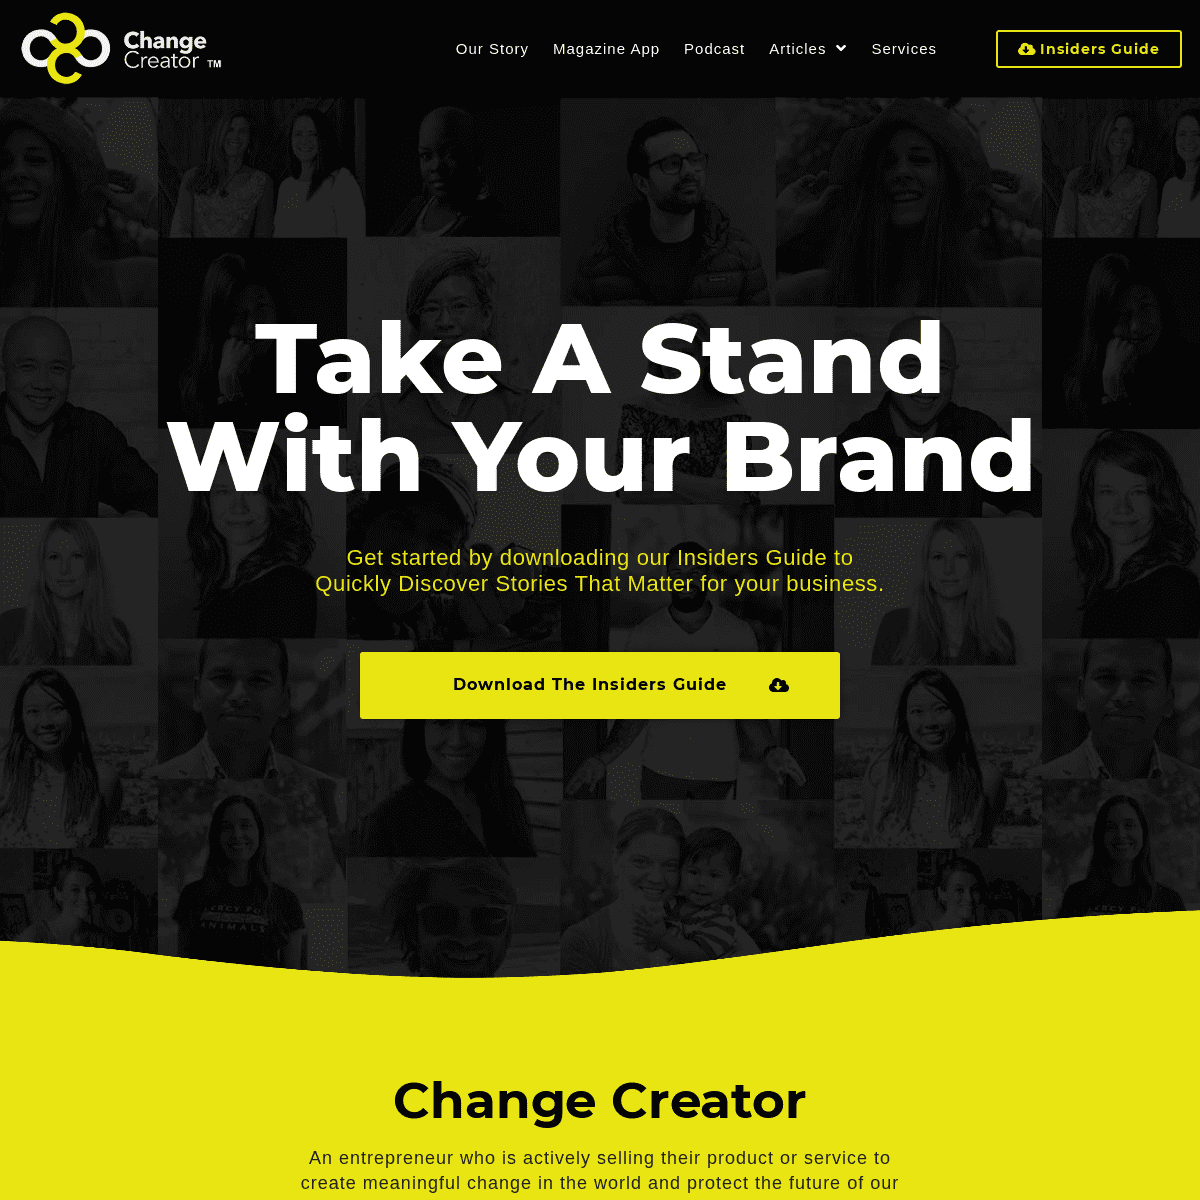 Take a Stand With Your Brand - Be a Change Creator